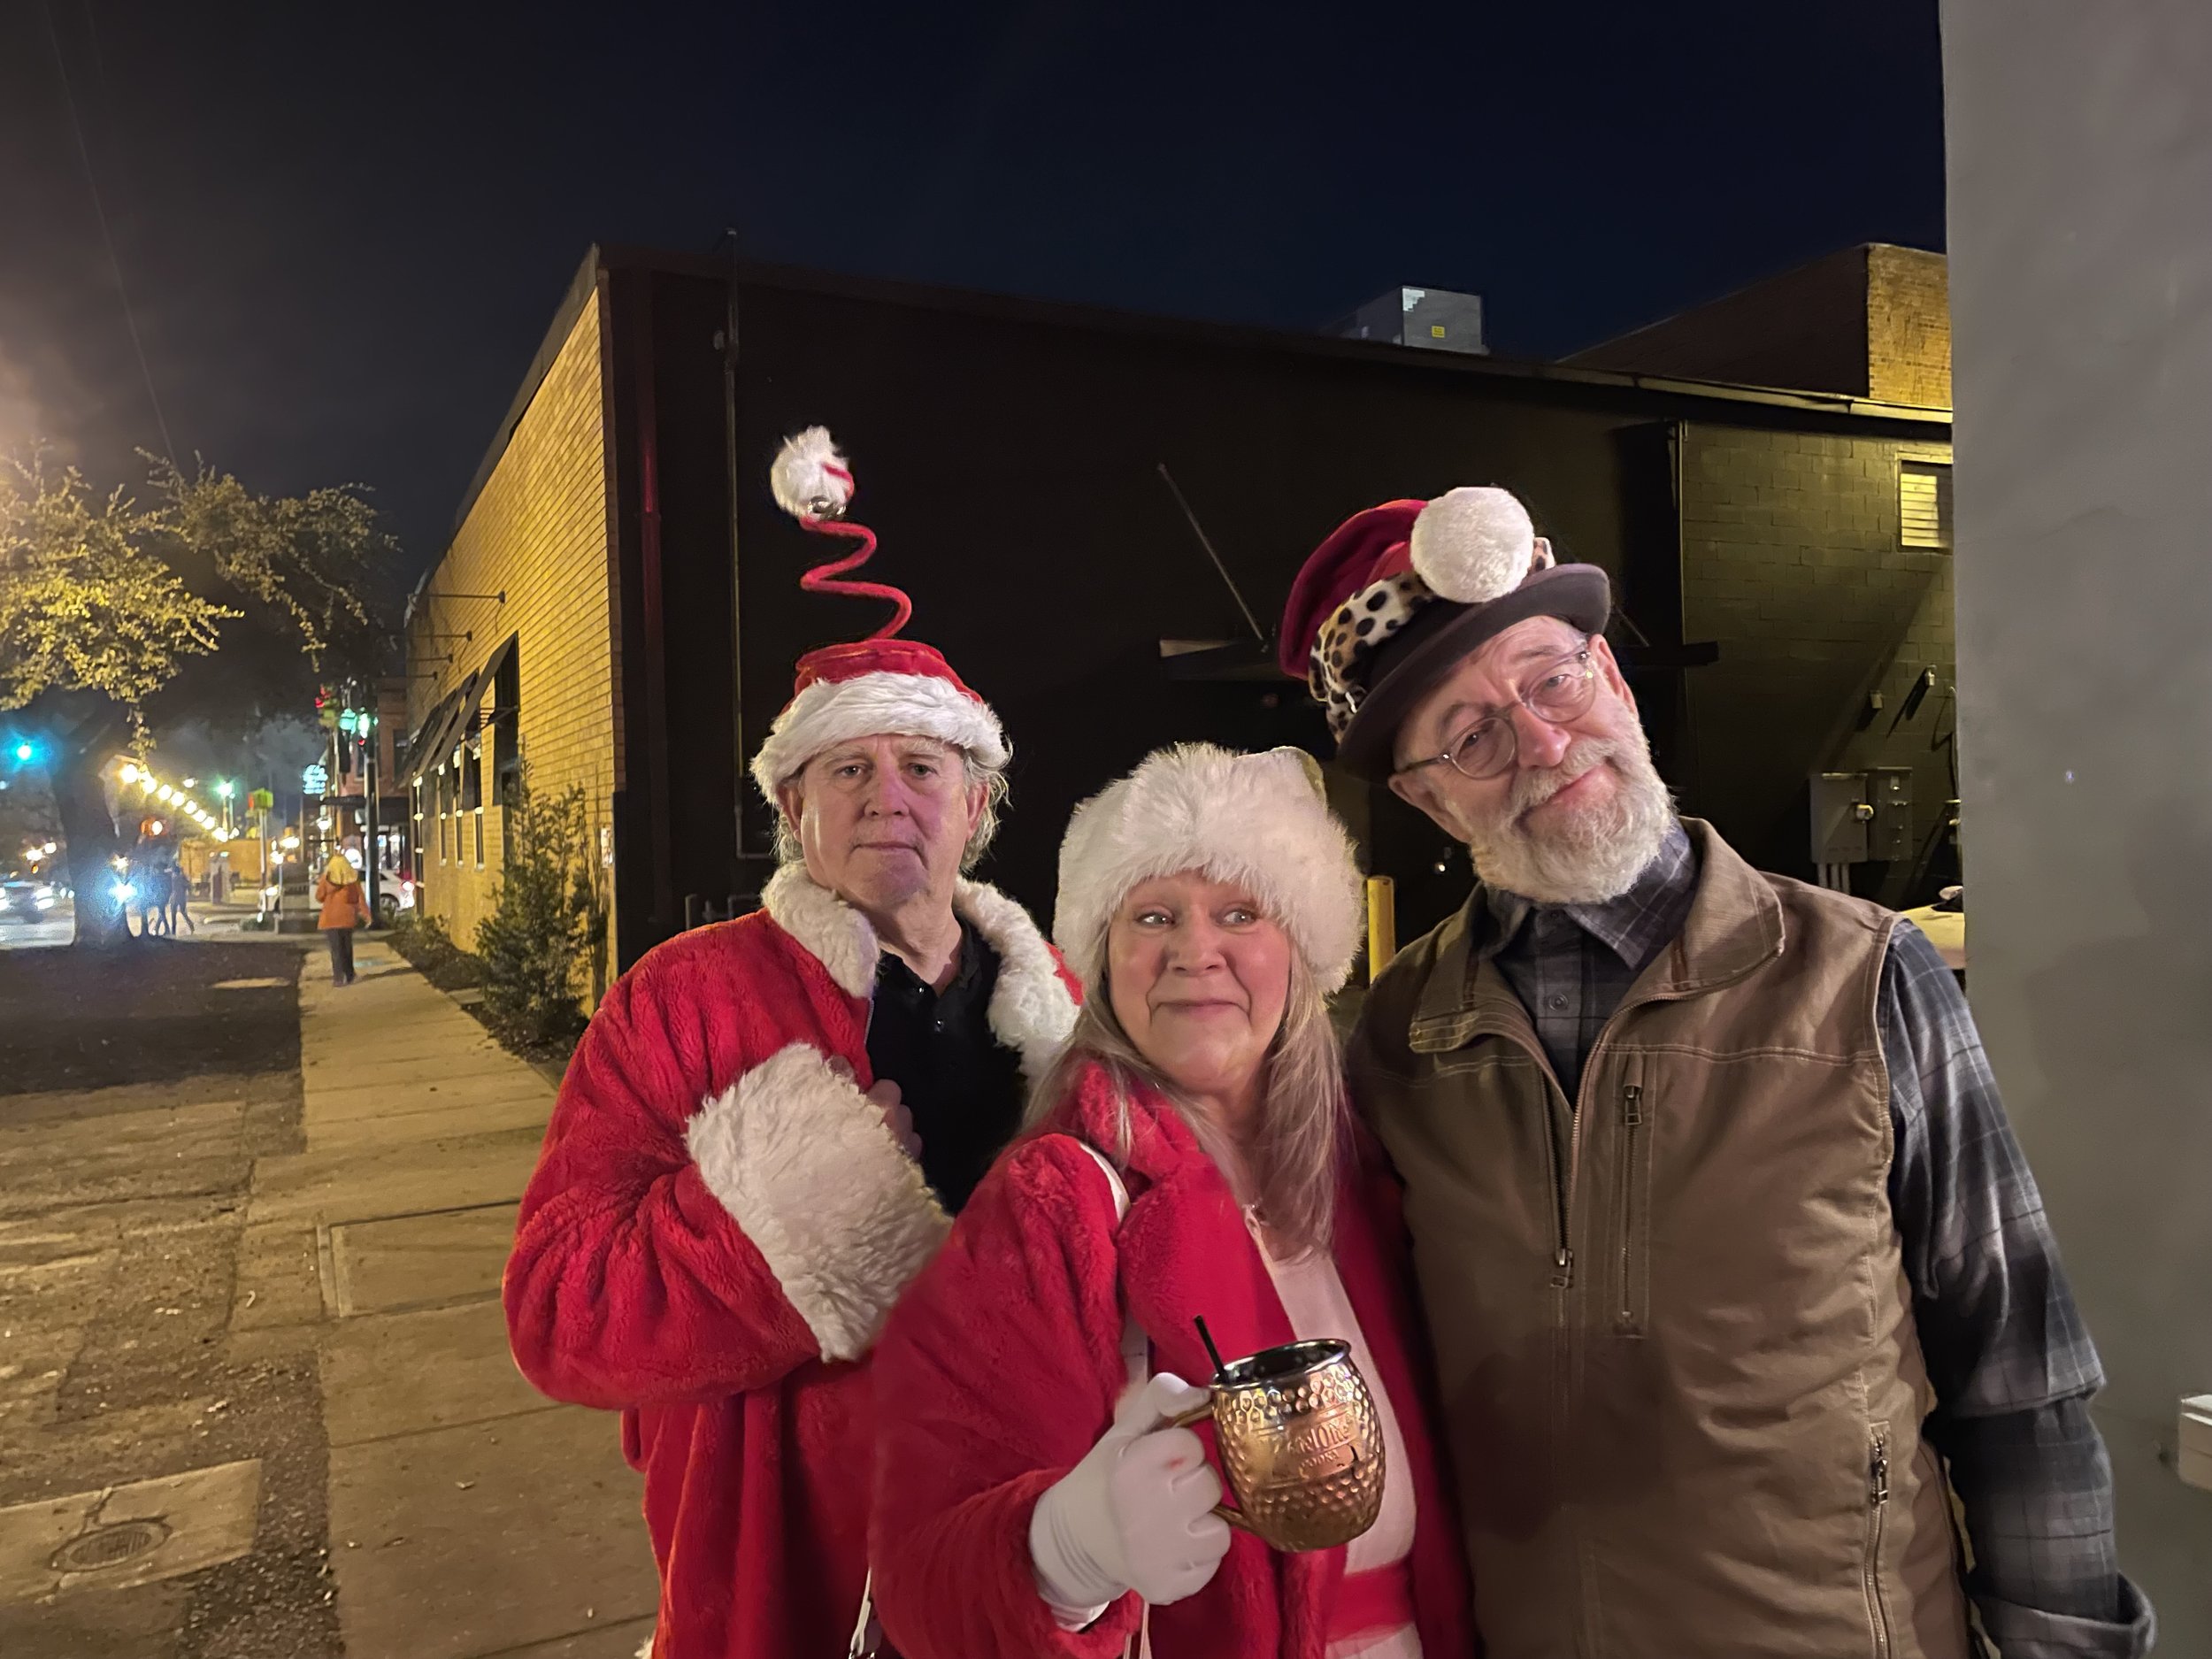 Jasper Friends Dick Moons and BA Hohman pose with our host, Clark Ellefson, outside the Art Bar during our Santa Crawl